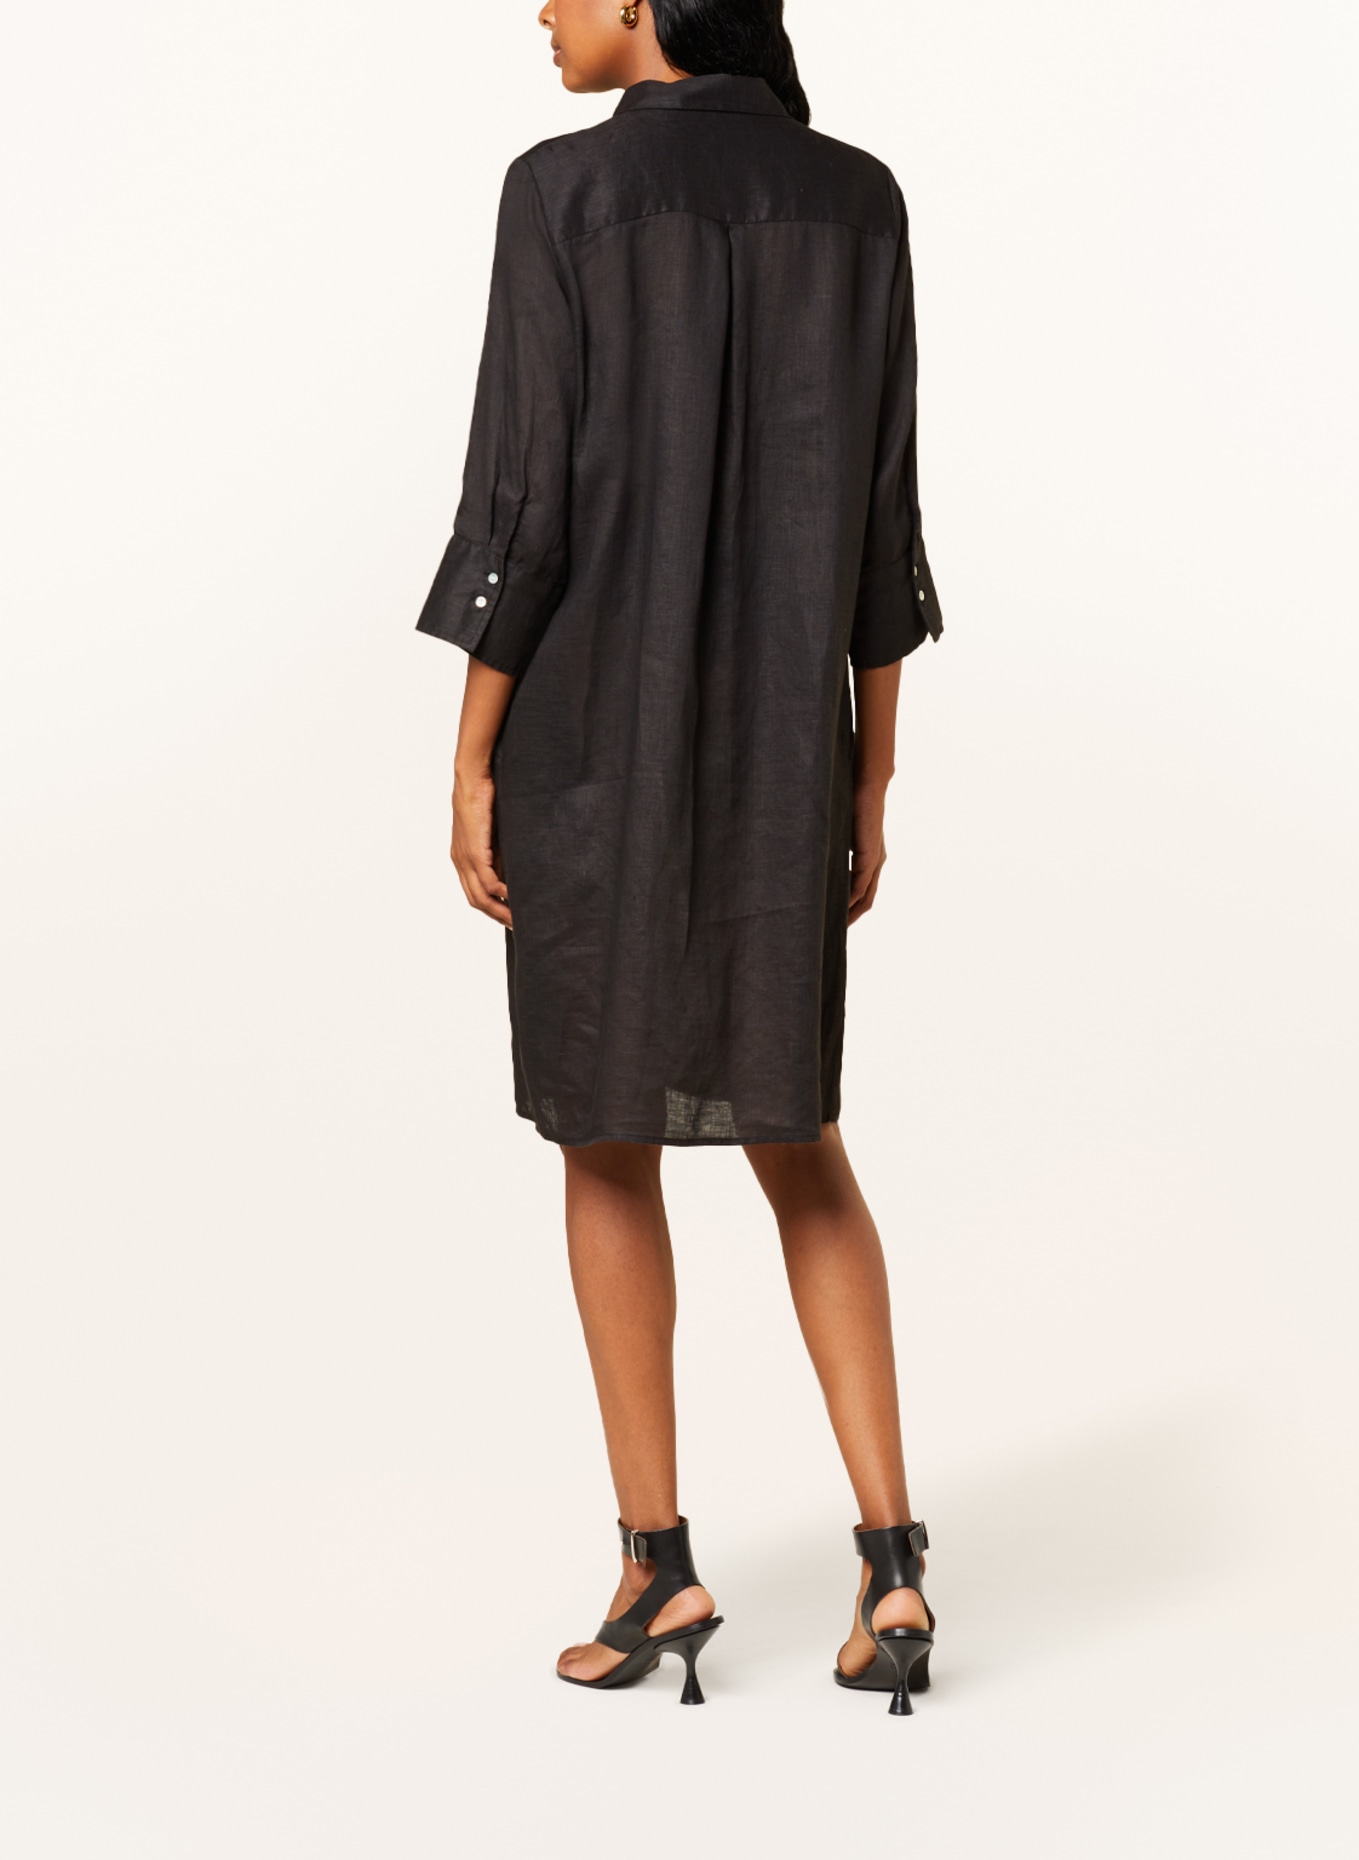 (THE MERCER) N.Y. Shirt dress made of linen with 3/4 sleeves, Color: BLACK (Image 3)